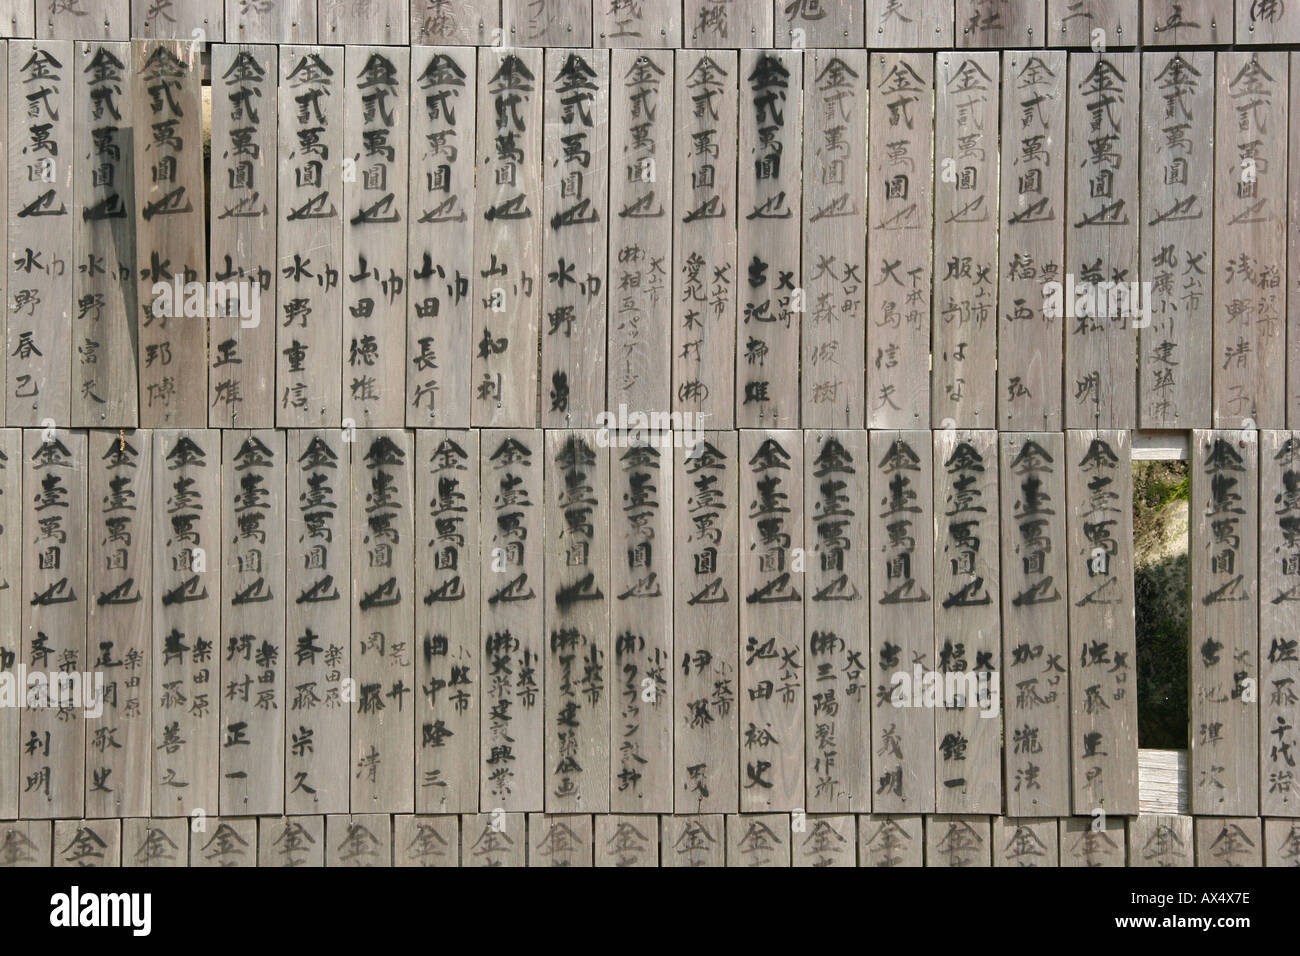 Wooden plaques at a shinto shrine in Japan Stock Photo